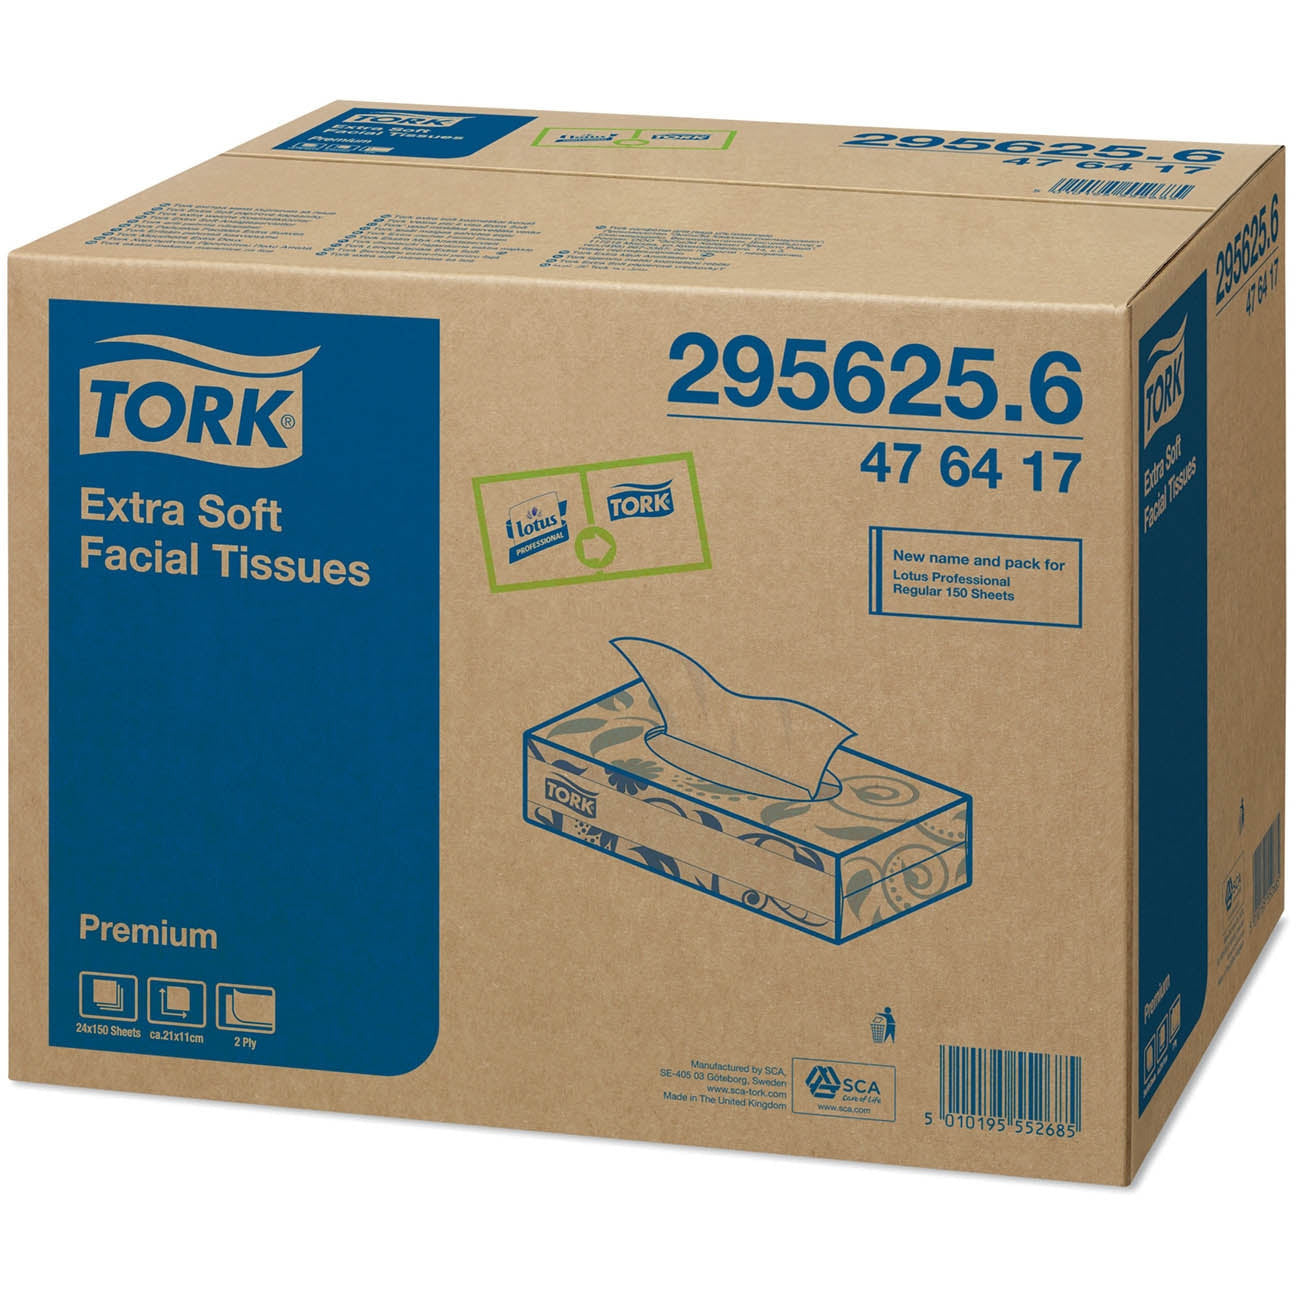 Tork Extra Soft Facial Tissues Premium 2Ply - 476417 - 24 Boxes x 100 Sheets